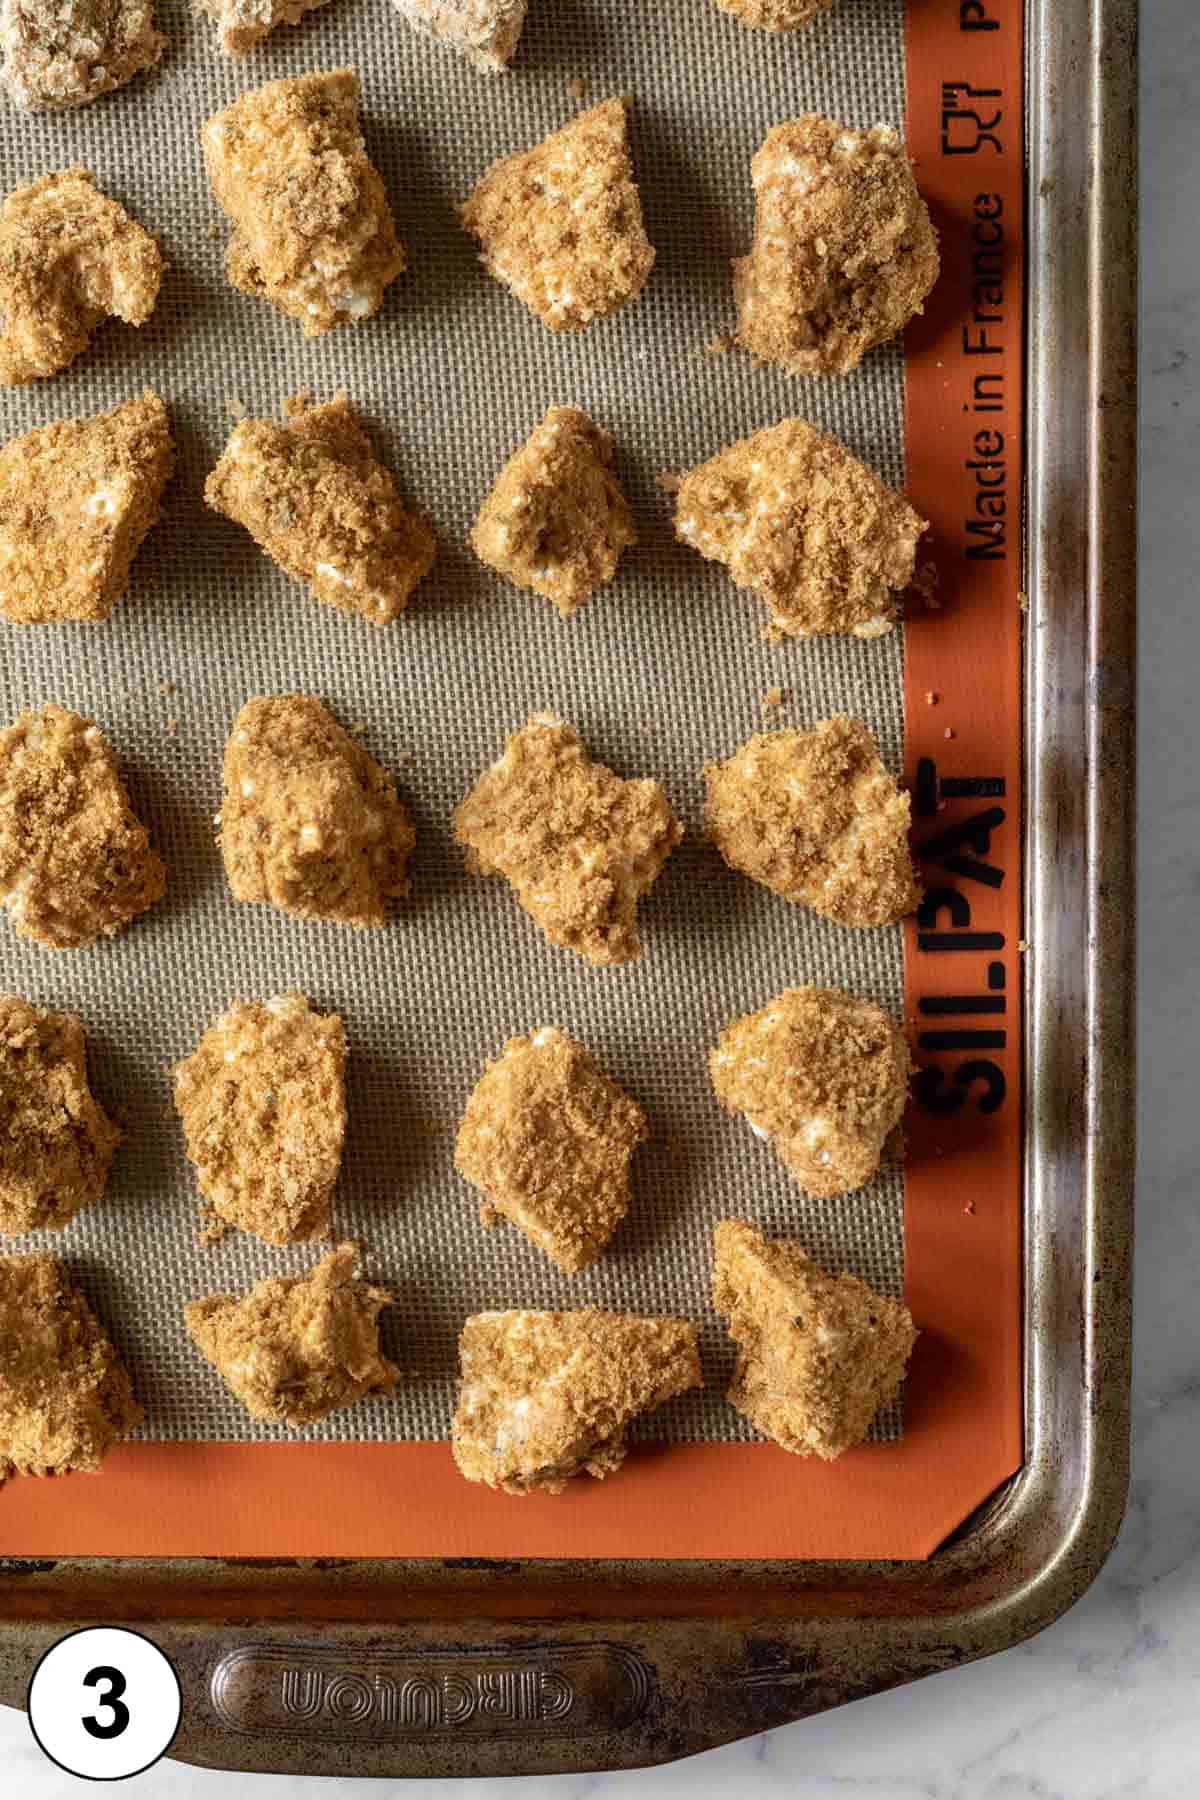 coated tofu nuggets on a silicone mat-lined baking tray ready for the oven.